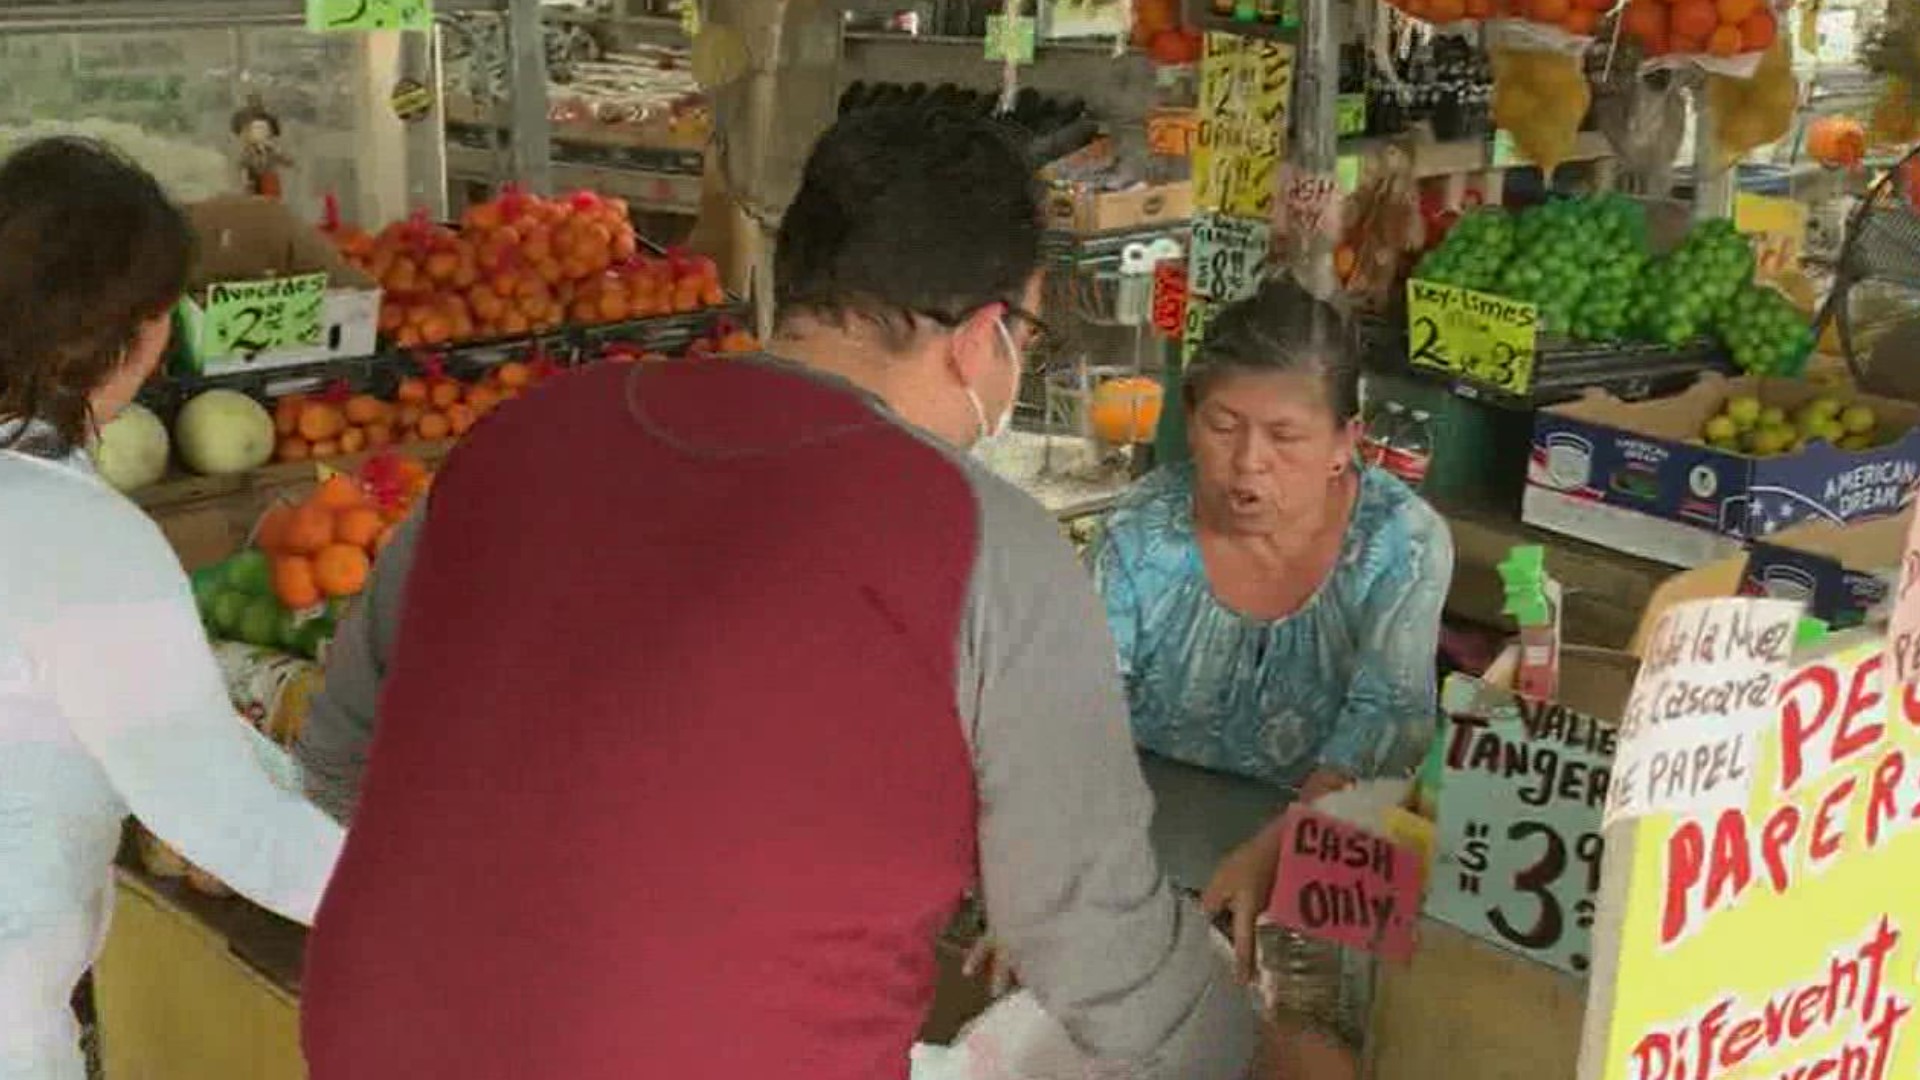 The fruit stand has been a popular spot for residents to purchase a variety of produce, but due to the new bypass being built doors are set to close.